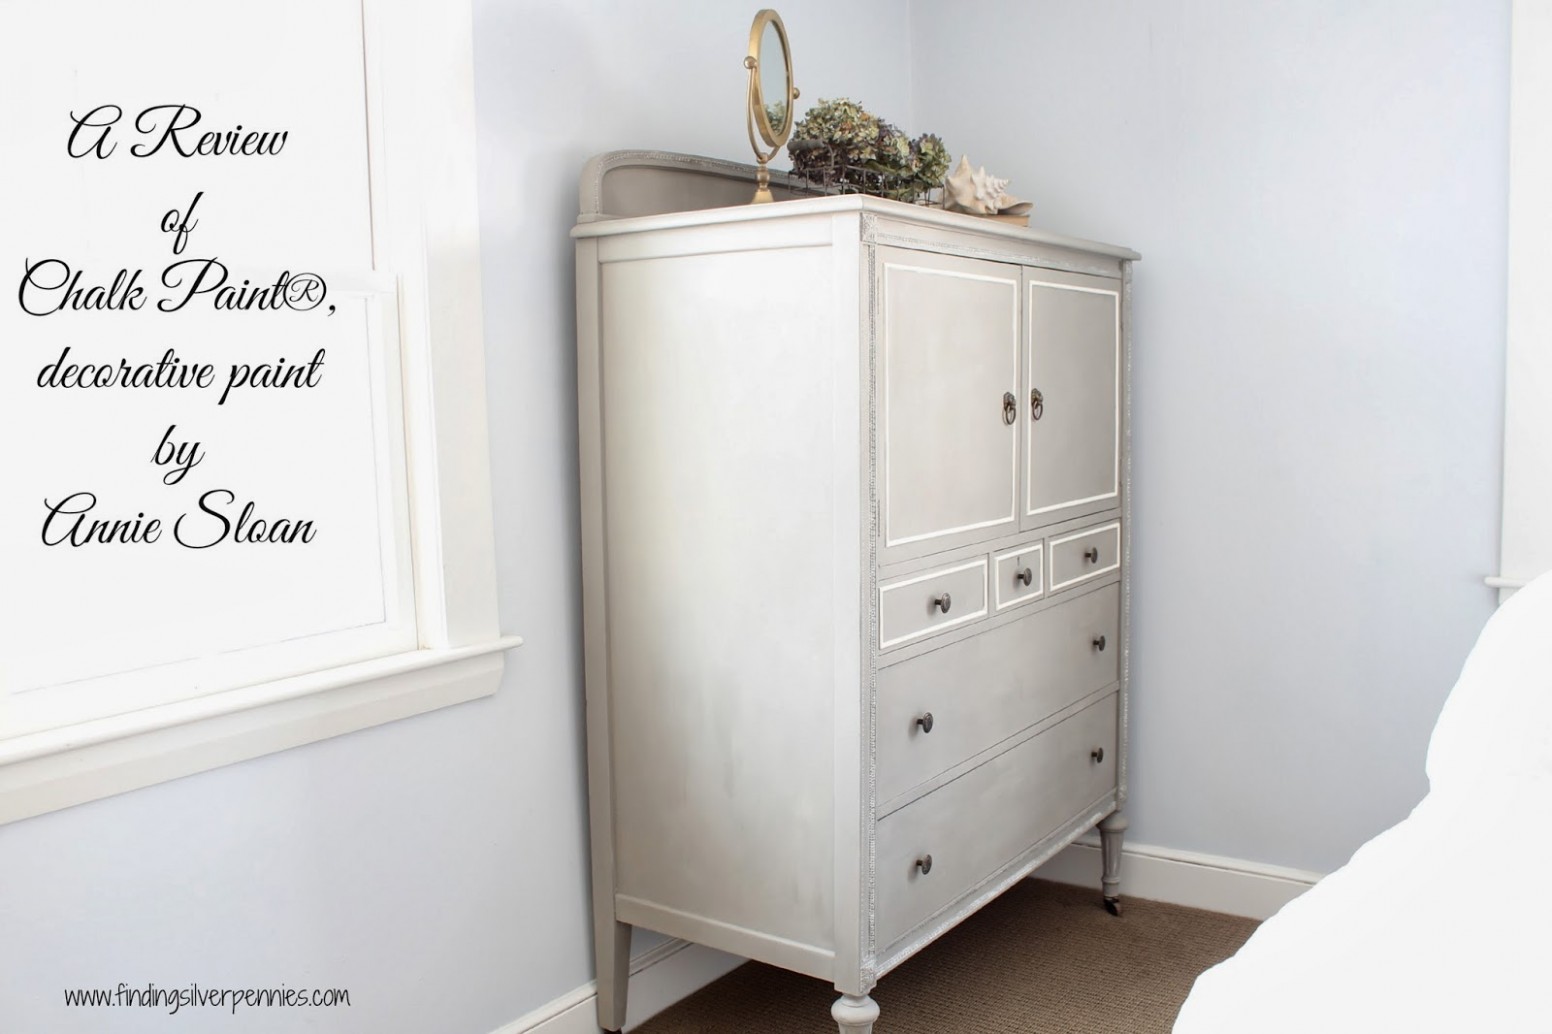 A Chalk Paint Review & The Clifton Armoire Finding Silver Pennies Who Carries Annie Sloan Chalk Paint Near Me